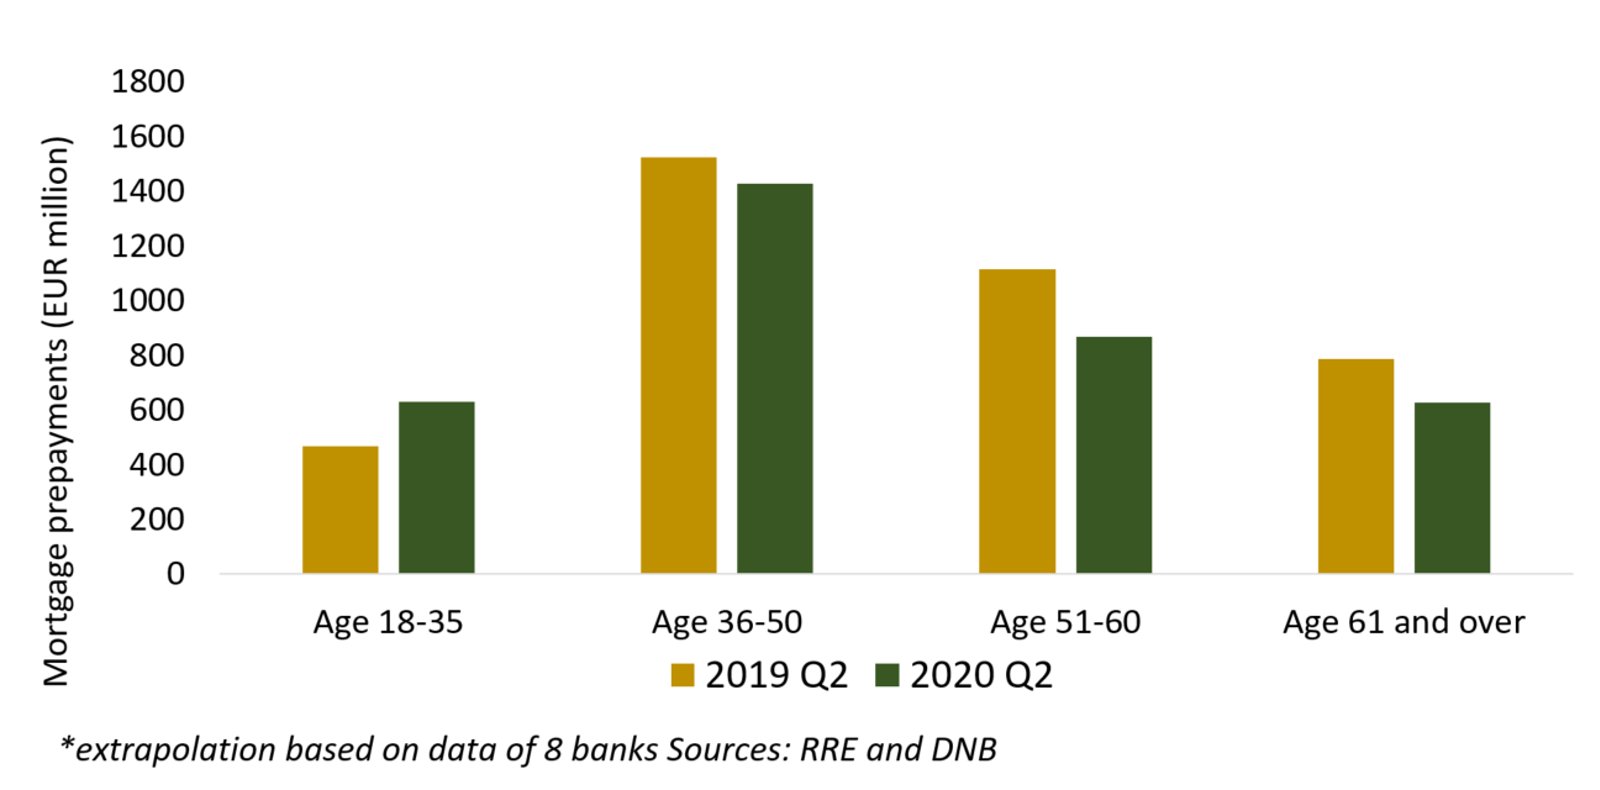 Figure 1: Prepayments (volume) by age category*